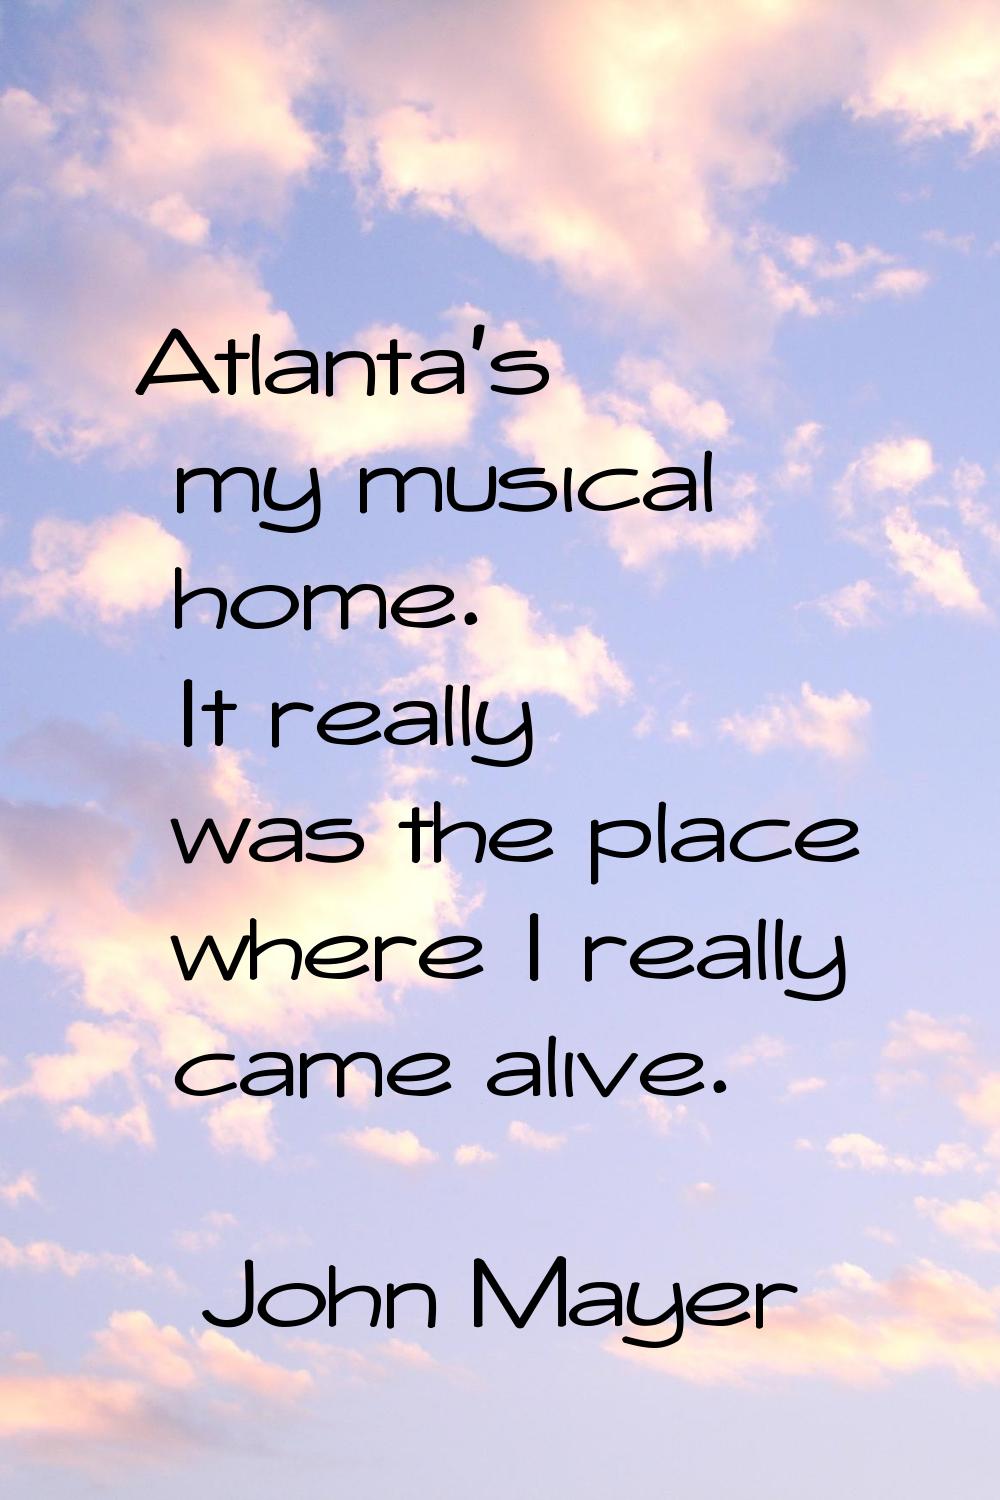 Atlanta's my musical home. It really was the place where I really came alive.